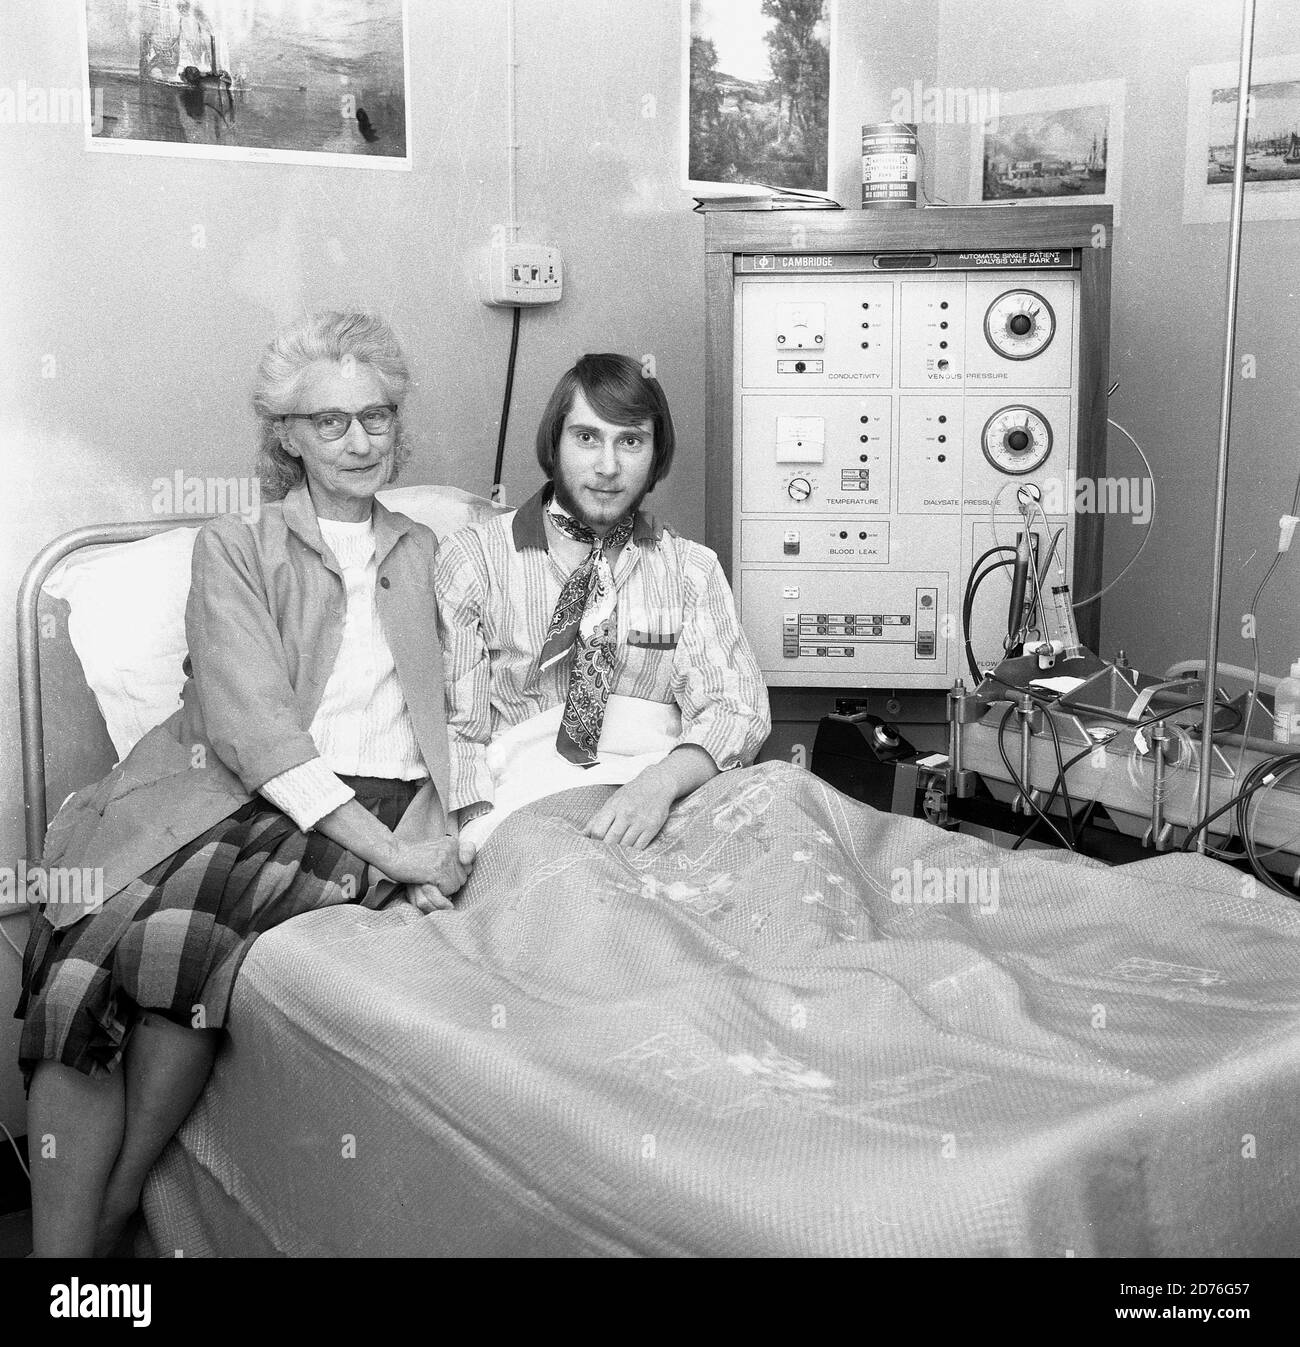 1970s, hospital, a male paient sitting on a hospital bed with his female technician/nurse sitting beside him and holding his hand. He is having dialysis treatment, via a Cambridge Diaysis unit mark 5 machine, Lewisham, Southeast London, England, UK. Such treament is used when vital organs of the body do not function properly. Here the man is having the dialysis for his kidneys which are not performing as they should. The first successful dialysis took place in 1943. Stock Photo